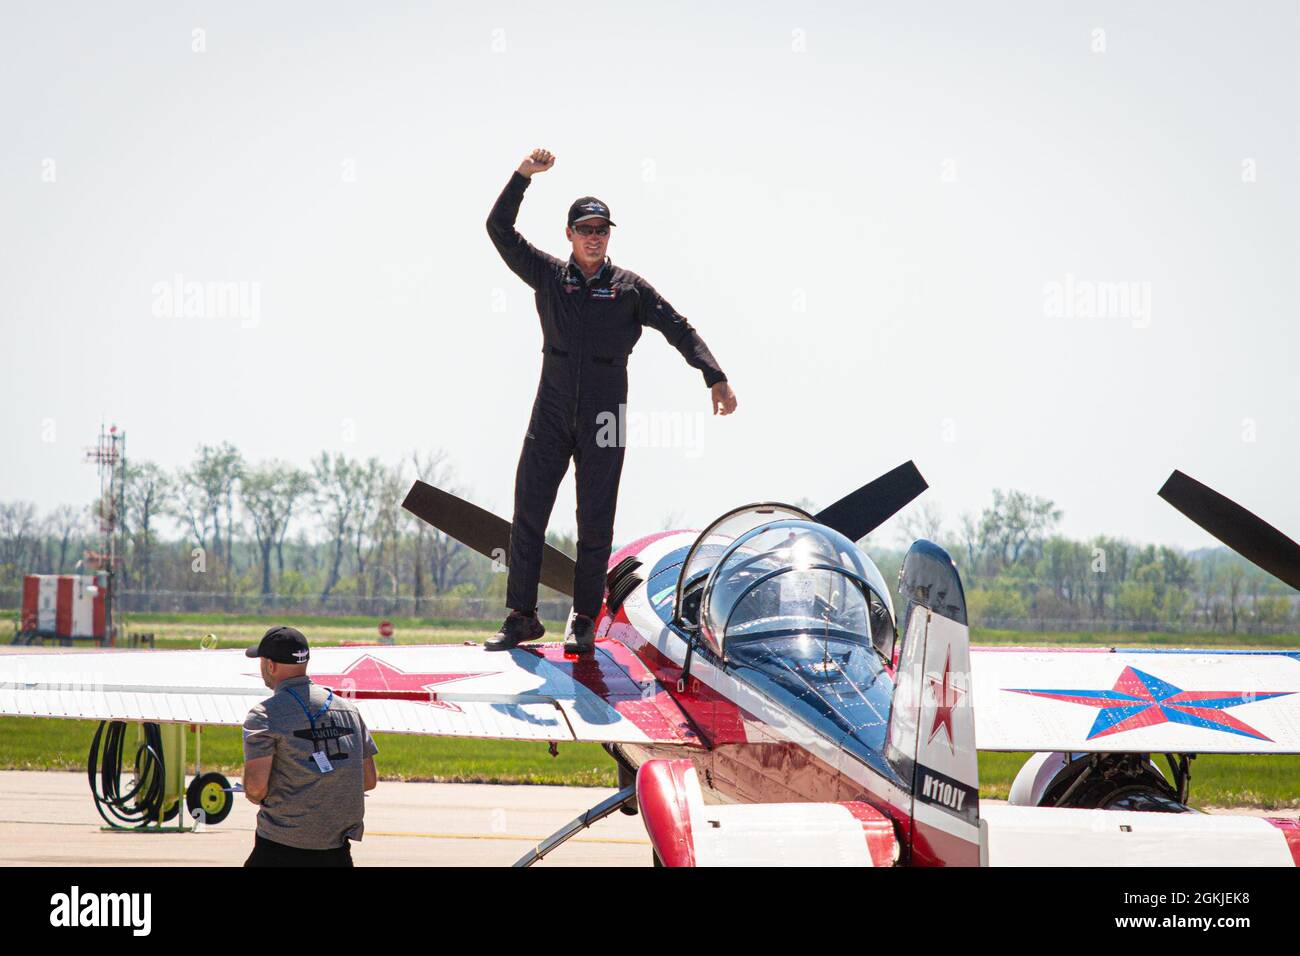 Jeff Boerboon stands on his YAK-110 aircraft and waves to the crowd during the Speed of Sound Airshow at Rosecrans Memorial Airport in St. Joseph, Missouri, May 1, 2021. The Yak-110 is two Yak-55 aircraft connected together with a J-85 jet engine welded to the bottom. The air show was hosted by the 139th Airlift Wing, and city of St. Joseph to thank the community for their support. The air show committee estimated around 30,000 people attended during the weekend performances in which the United States Air Force Thunderbirds Air Demonstration Squadron were featured. Stock Photo